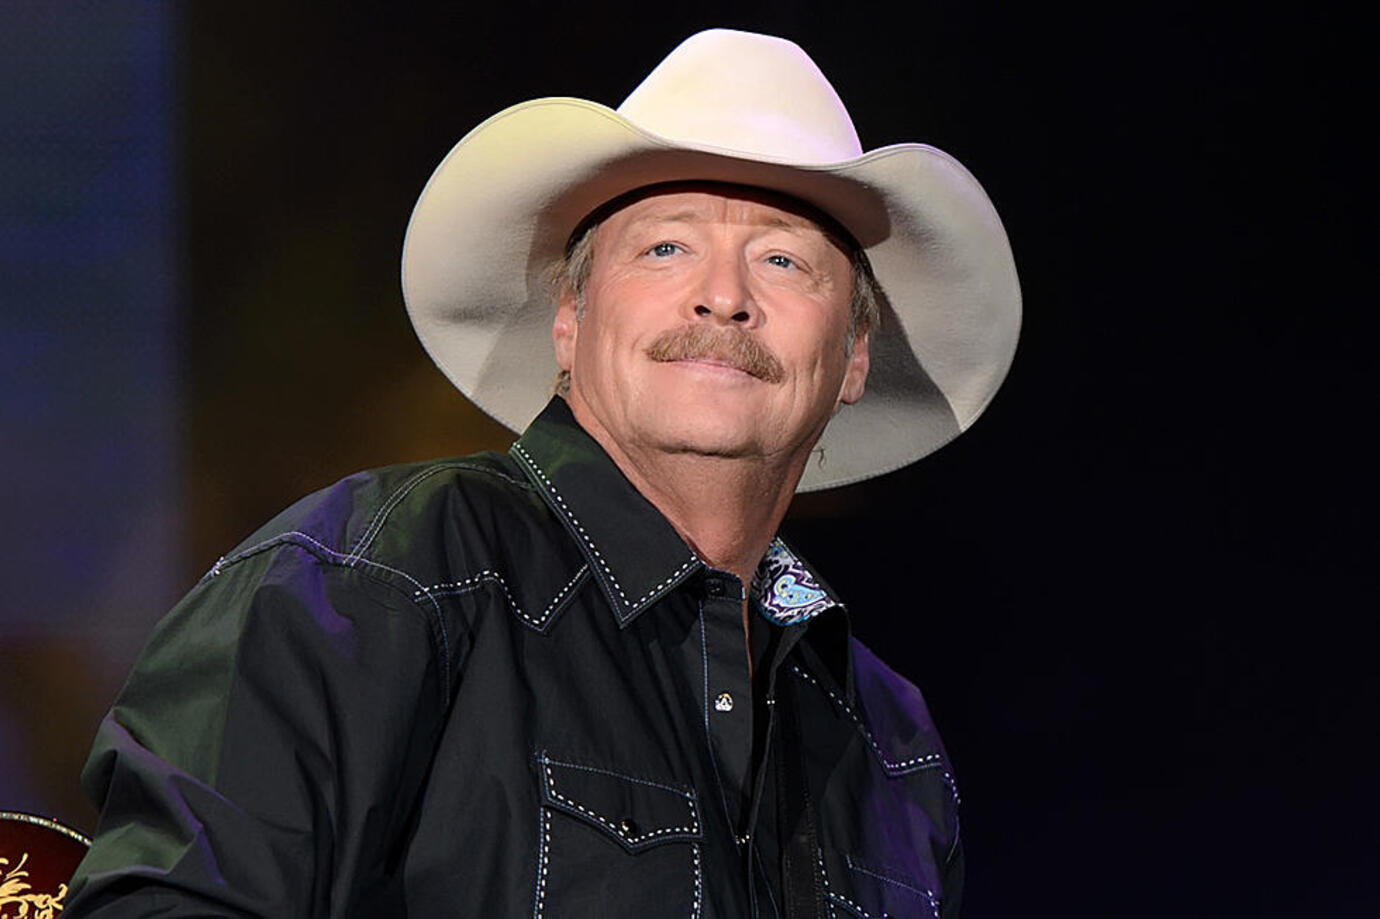 How Old Is Alan Jackson, The Country Singer